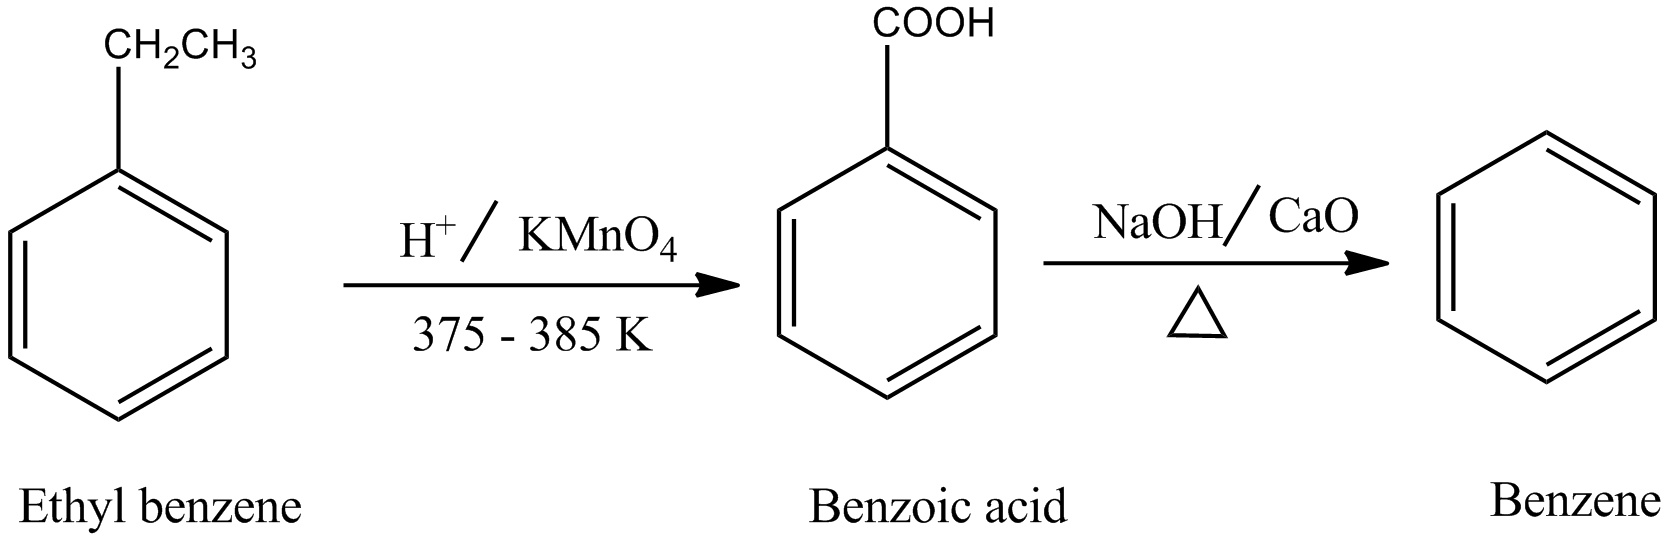 condensation reaction between benzoic acid and ethanol fireplace